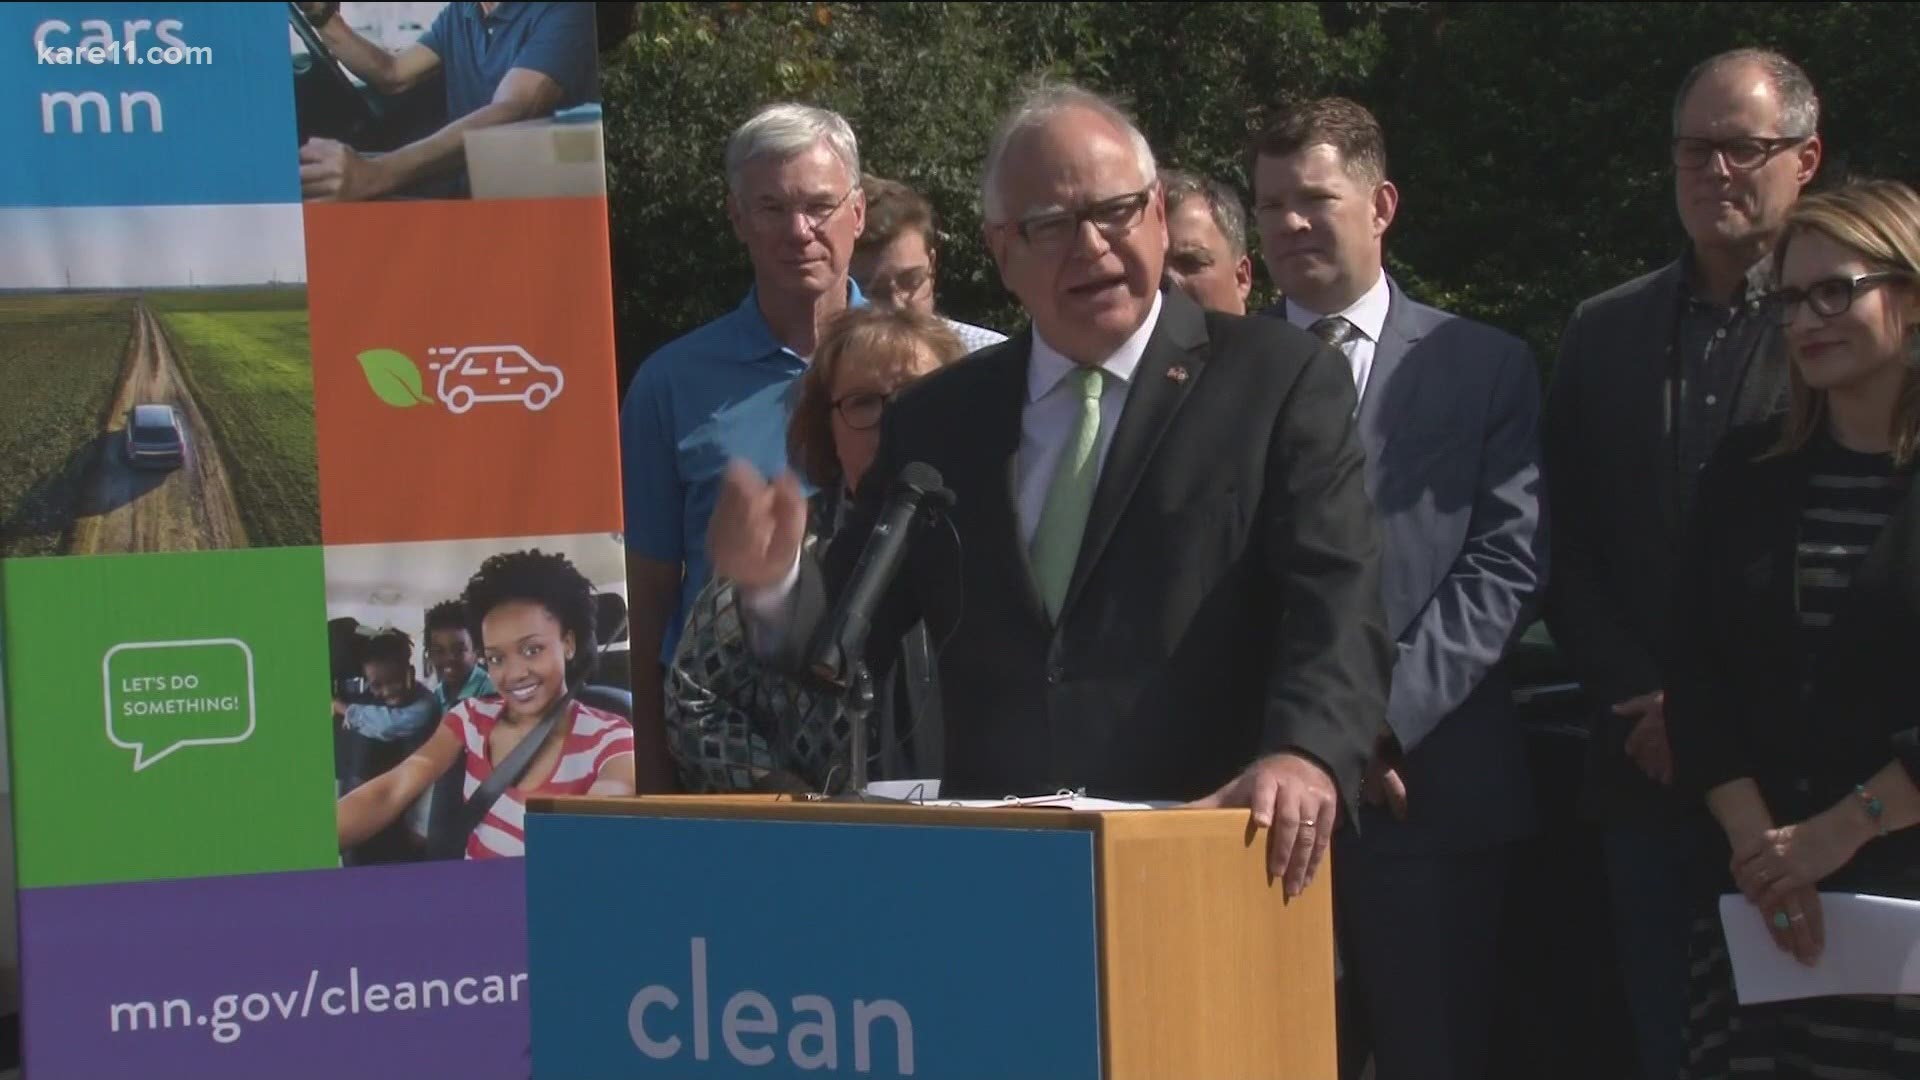 Gov. Walz hasn't backed off his Clean Cars emissions standards rule, despite a threat from GOP to block the DNR's funding and close state parks